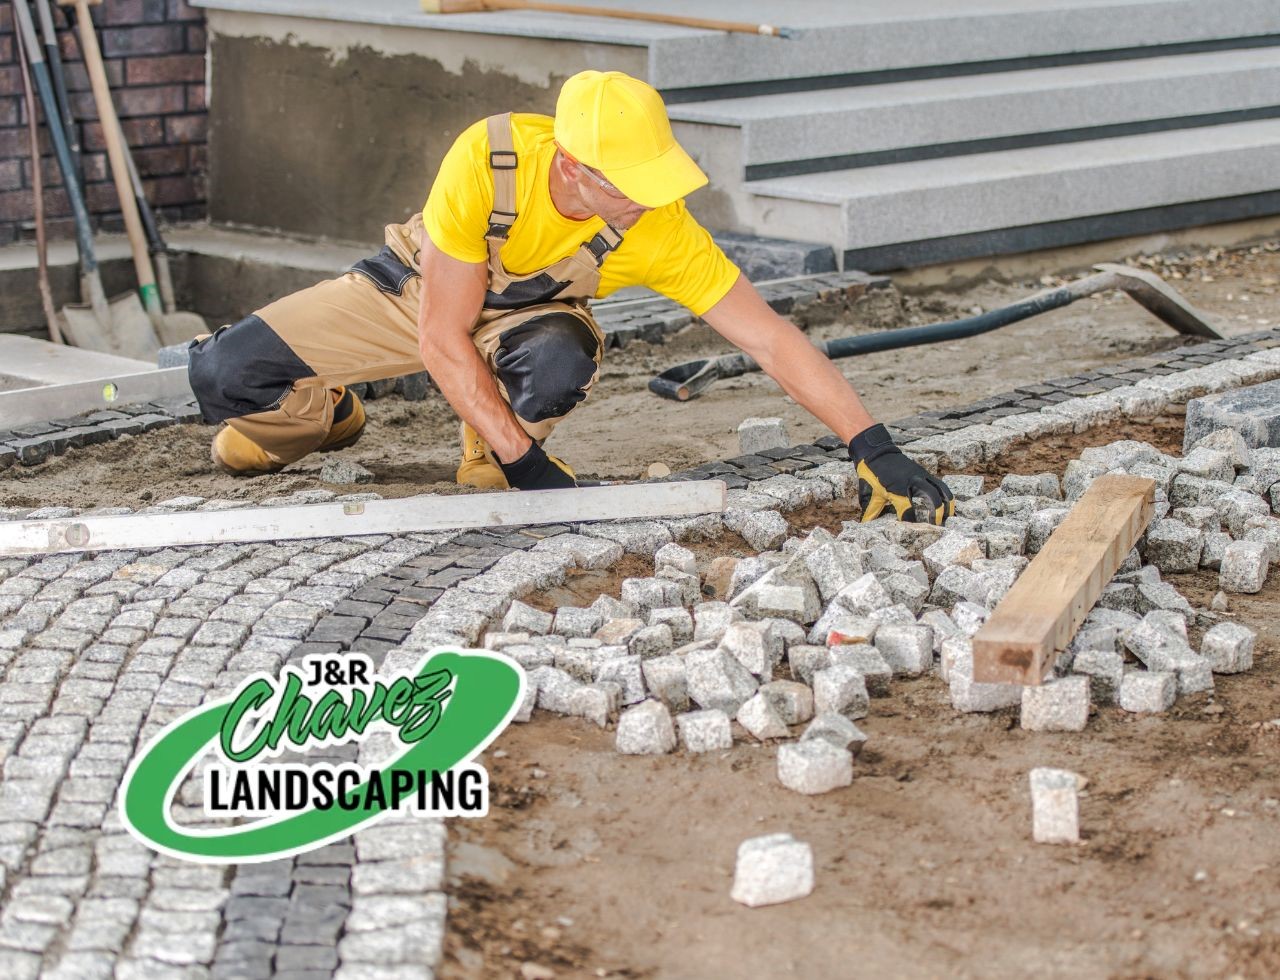 The Power of J & R Chavez Landscaping – transform your property with paver walkways services